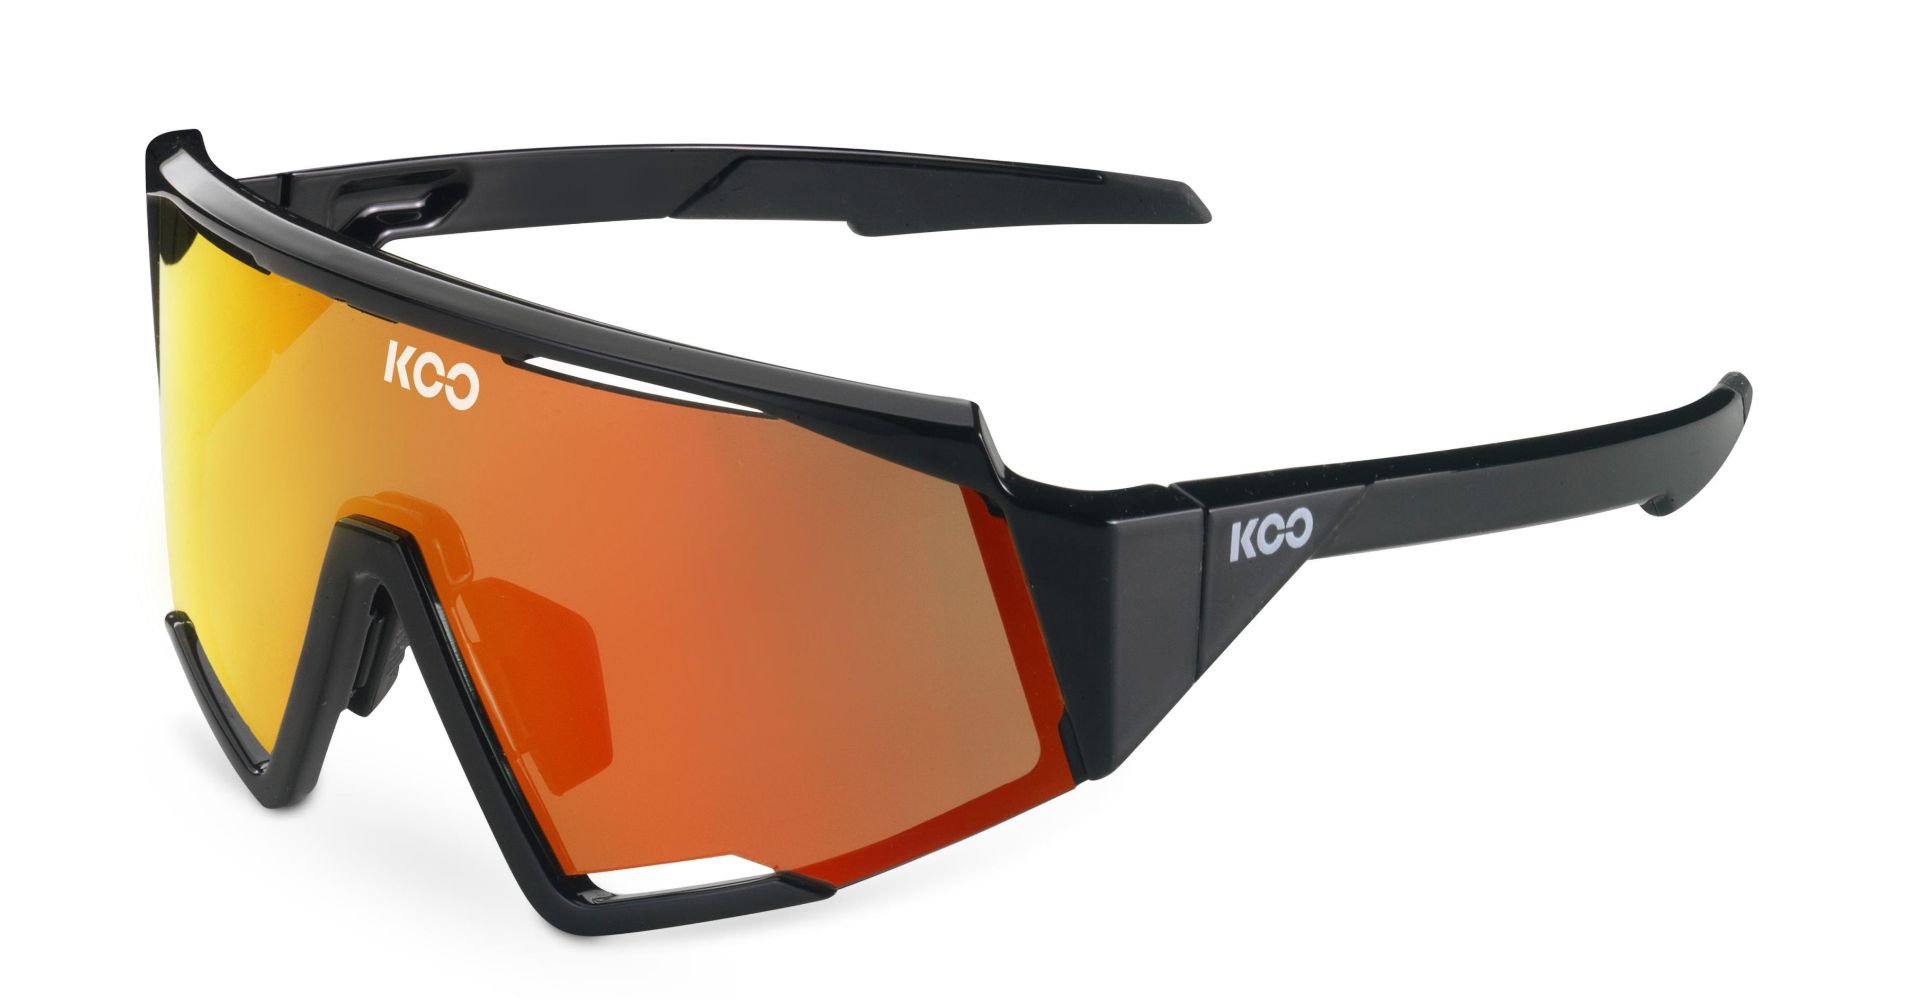 Kask Koo Spectro Cycling Goggles